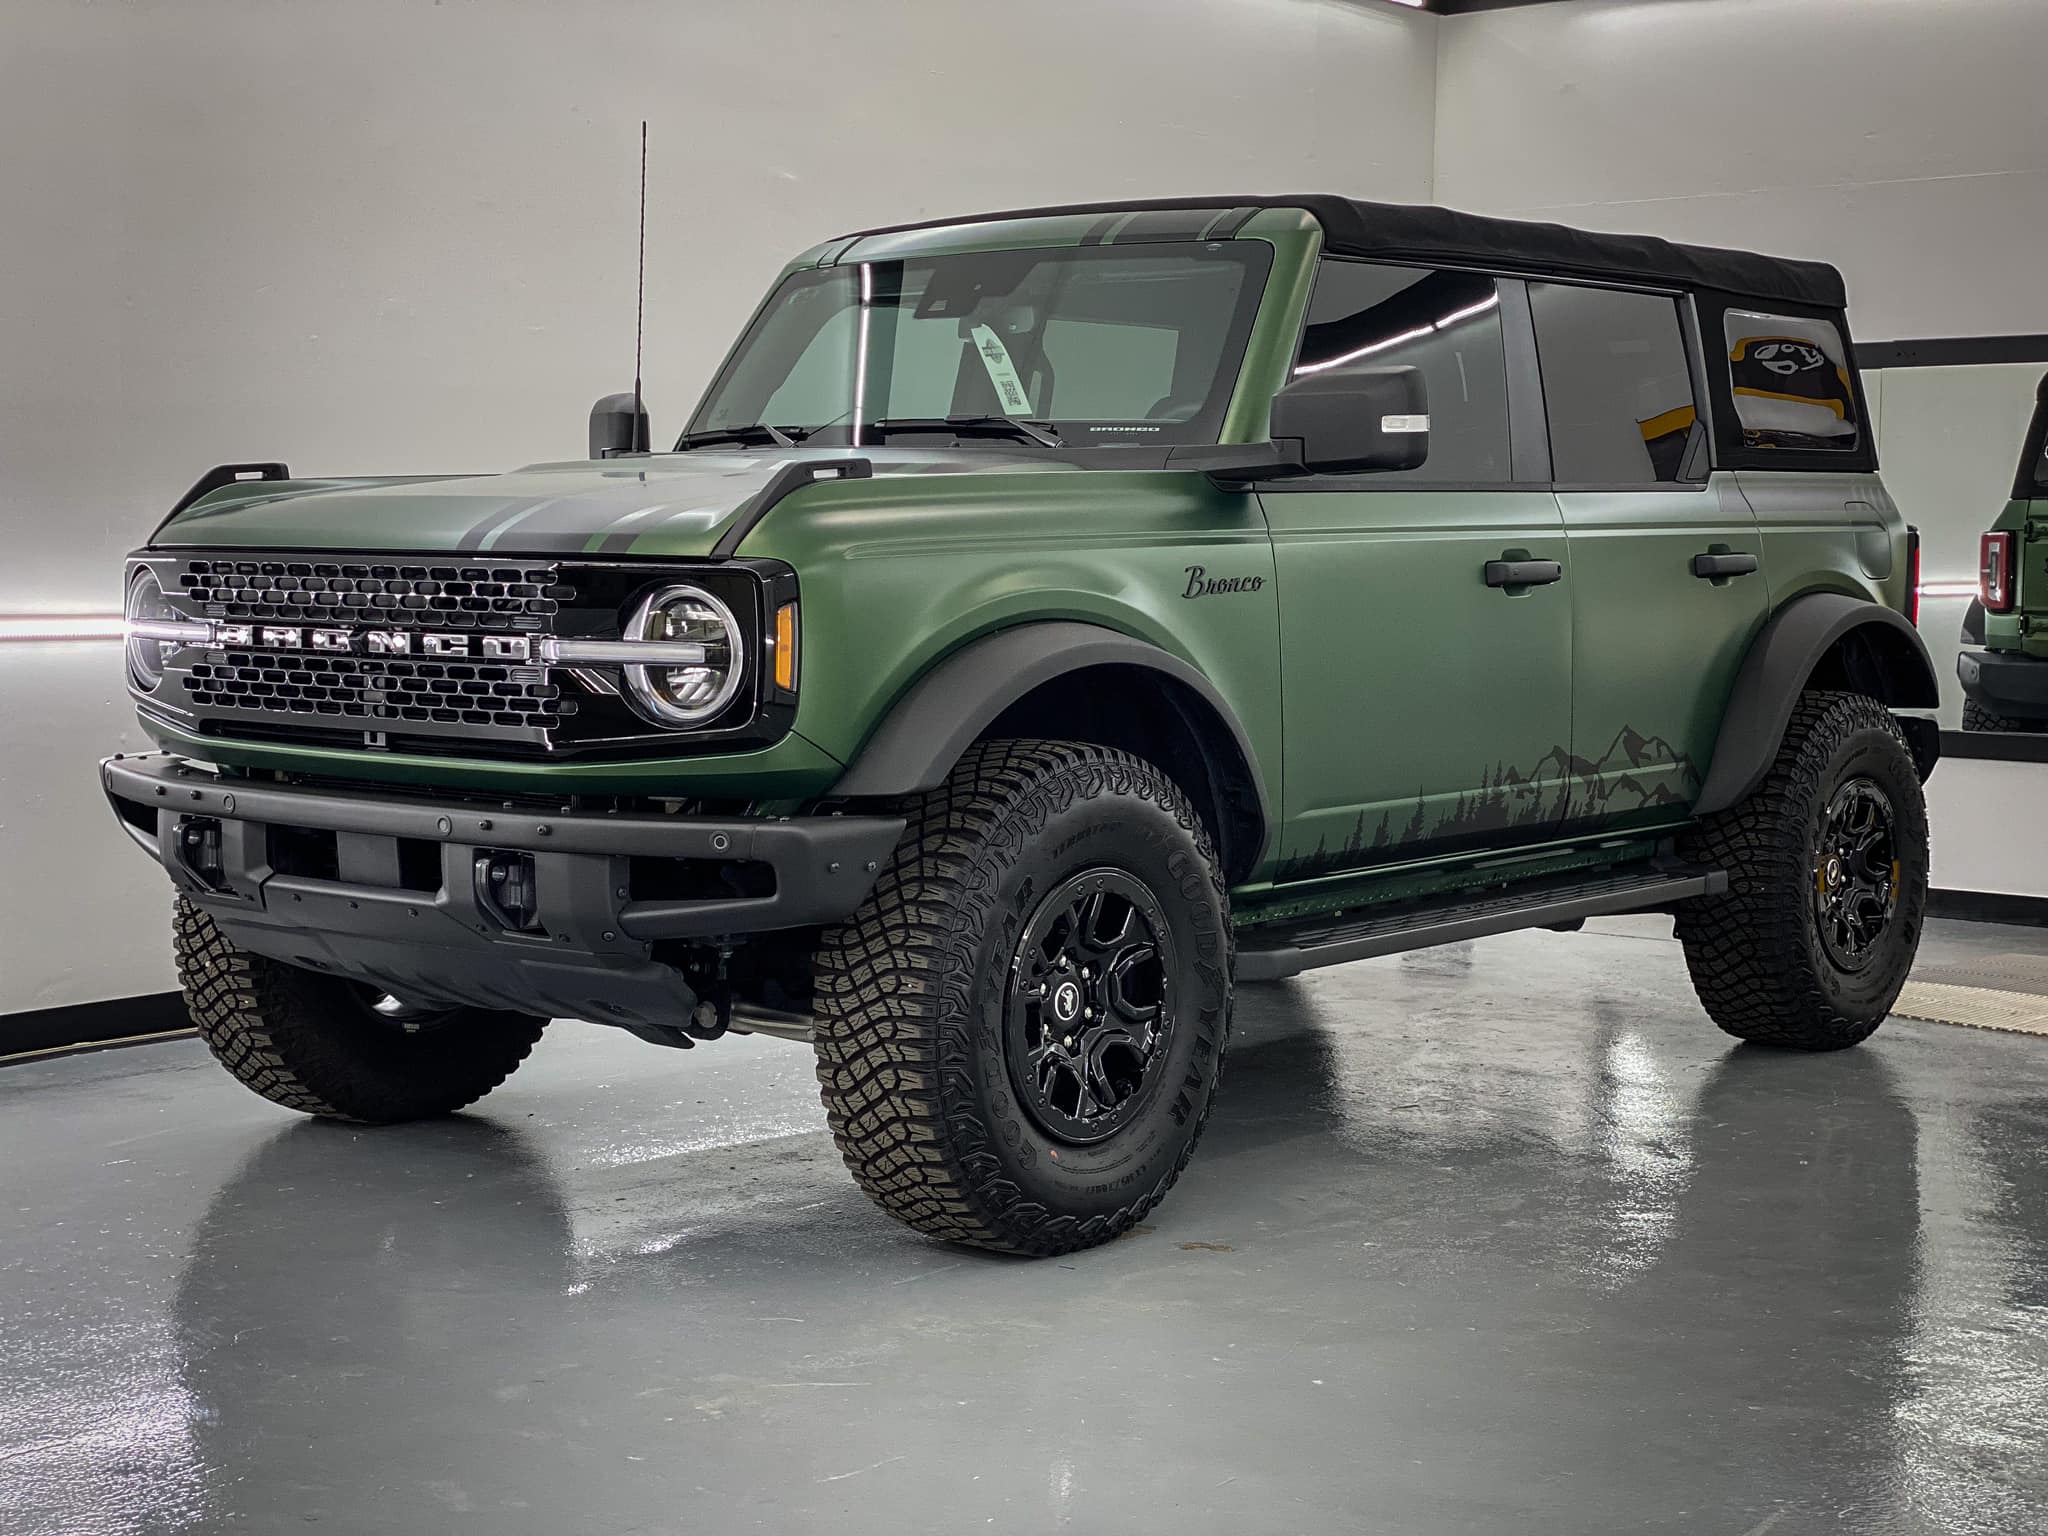 Eruption Green Bronco XPEL Stealth PPF Wrapped + Graphics + Racing Stripes 8.jpg